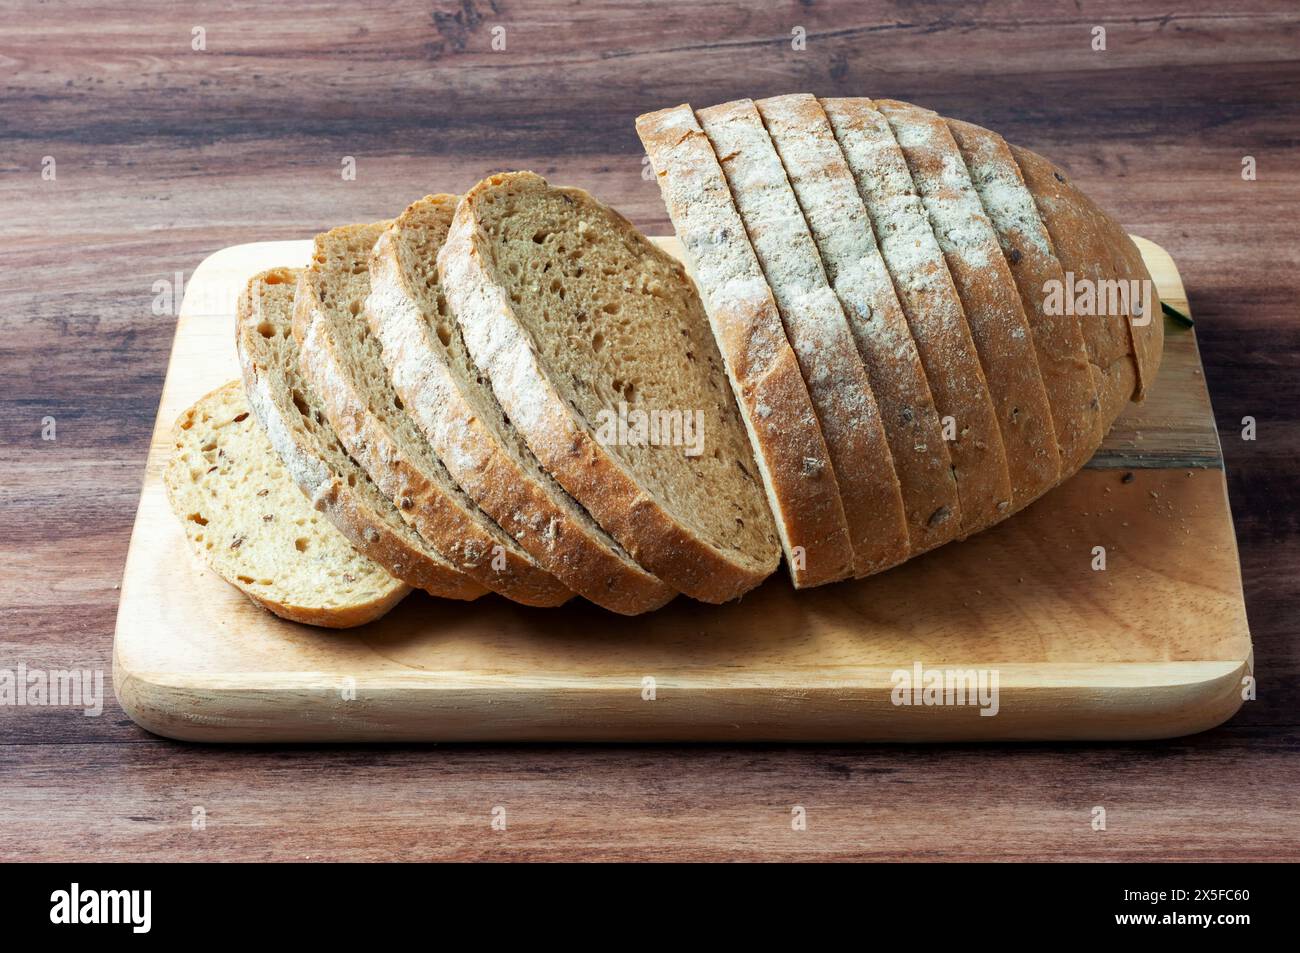 Loaf of multigrain bread on a wood tray Stock Photo